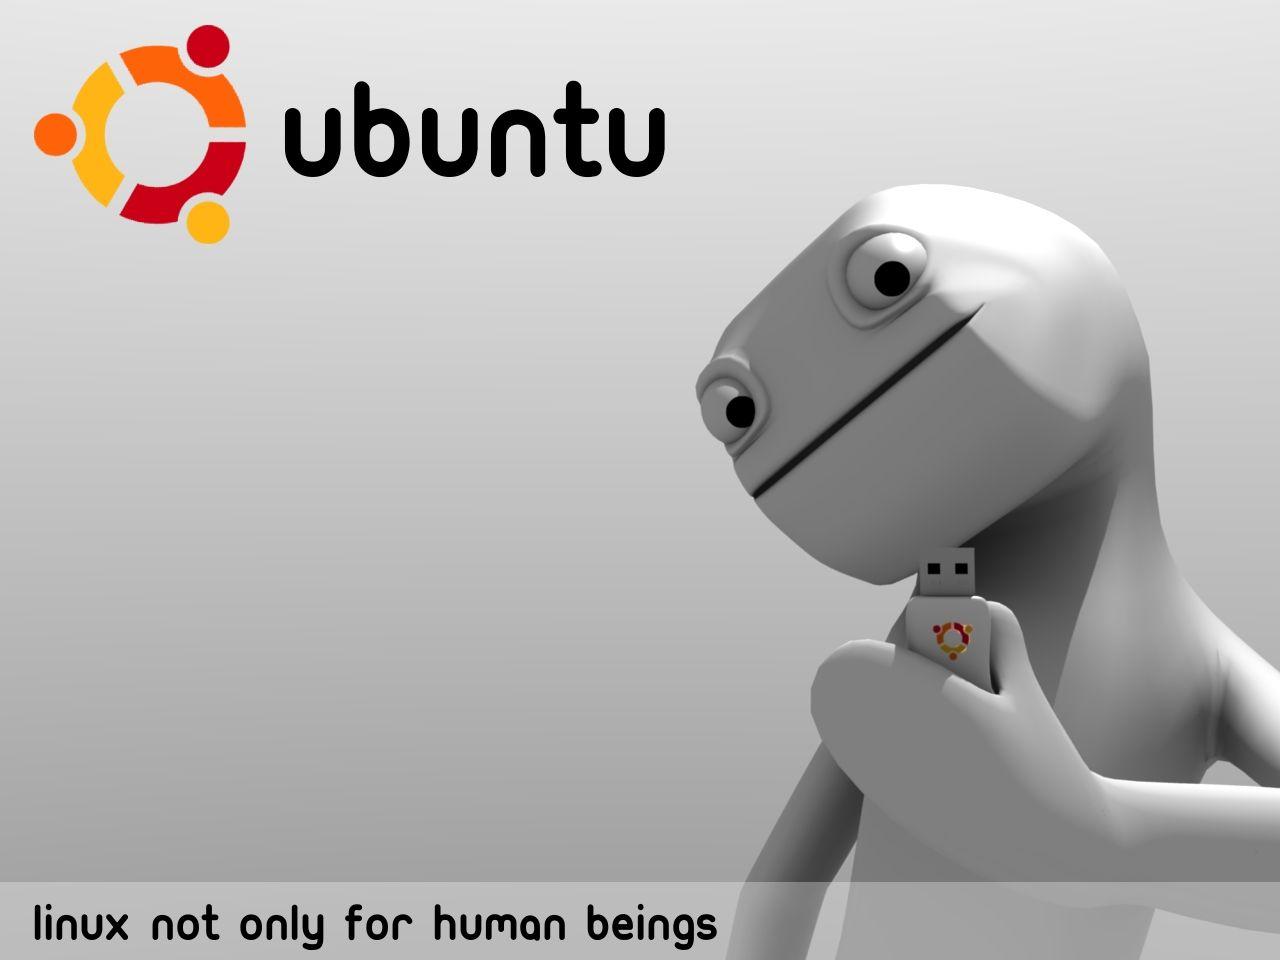 Ubuntu Background: Linux not only for human beings